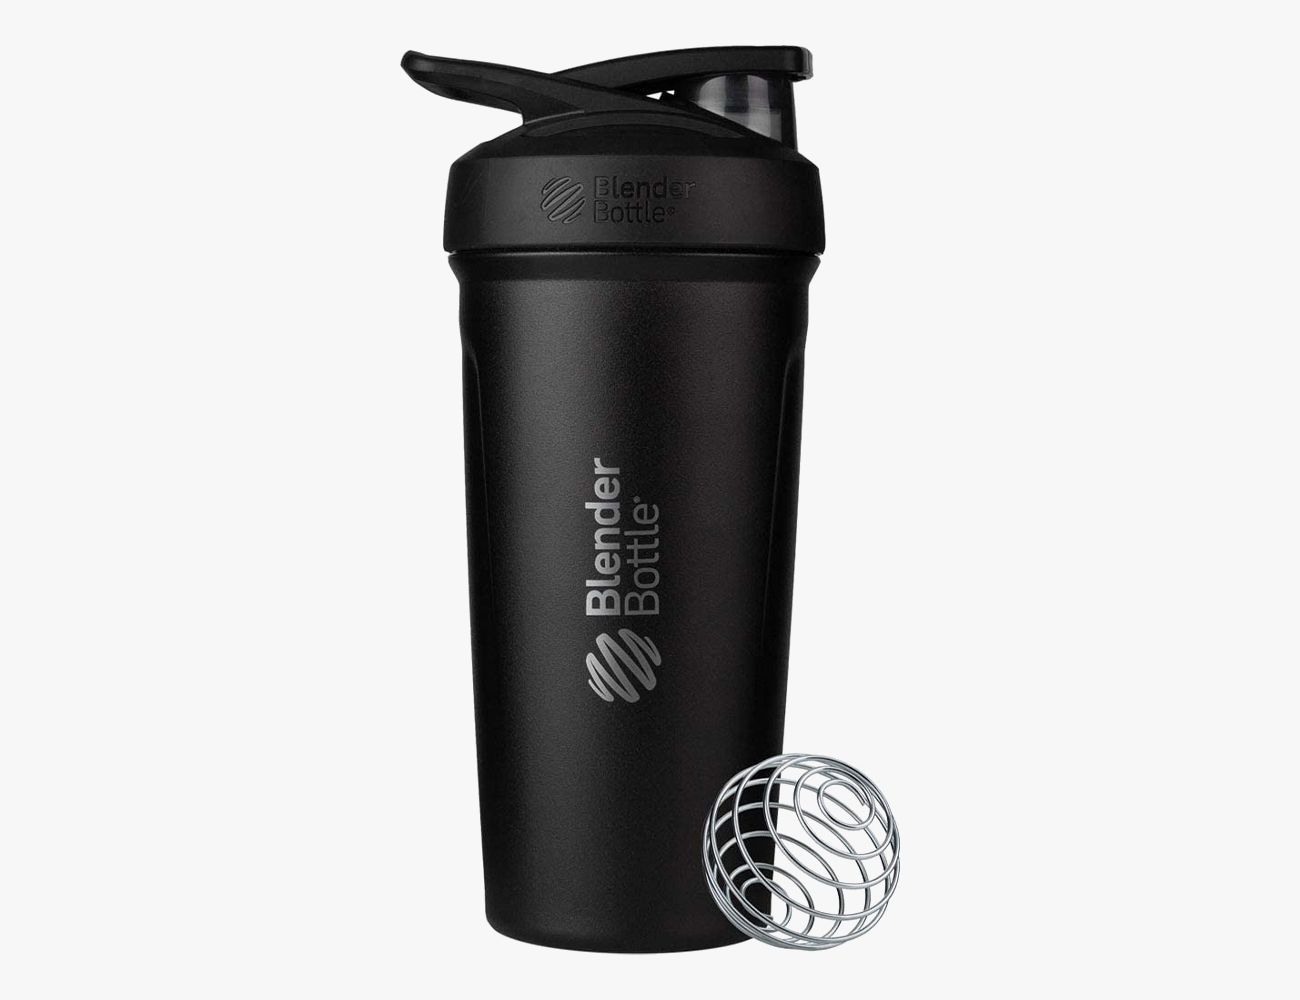 TECHTOP NOPain No Gain Sports Gym Fitness Shaker Bottle Perfect for Protein  Shakes and Pre Workout with Plastic Whisk Mixer Ball 700 ml 